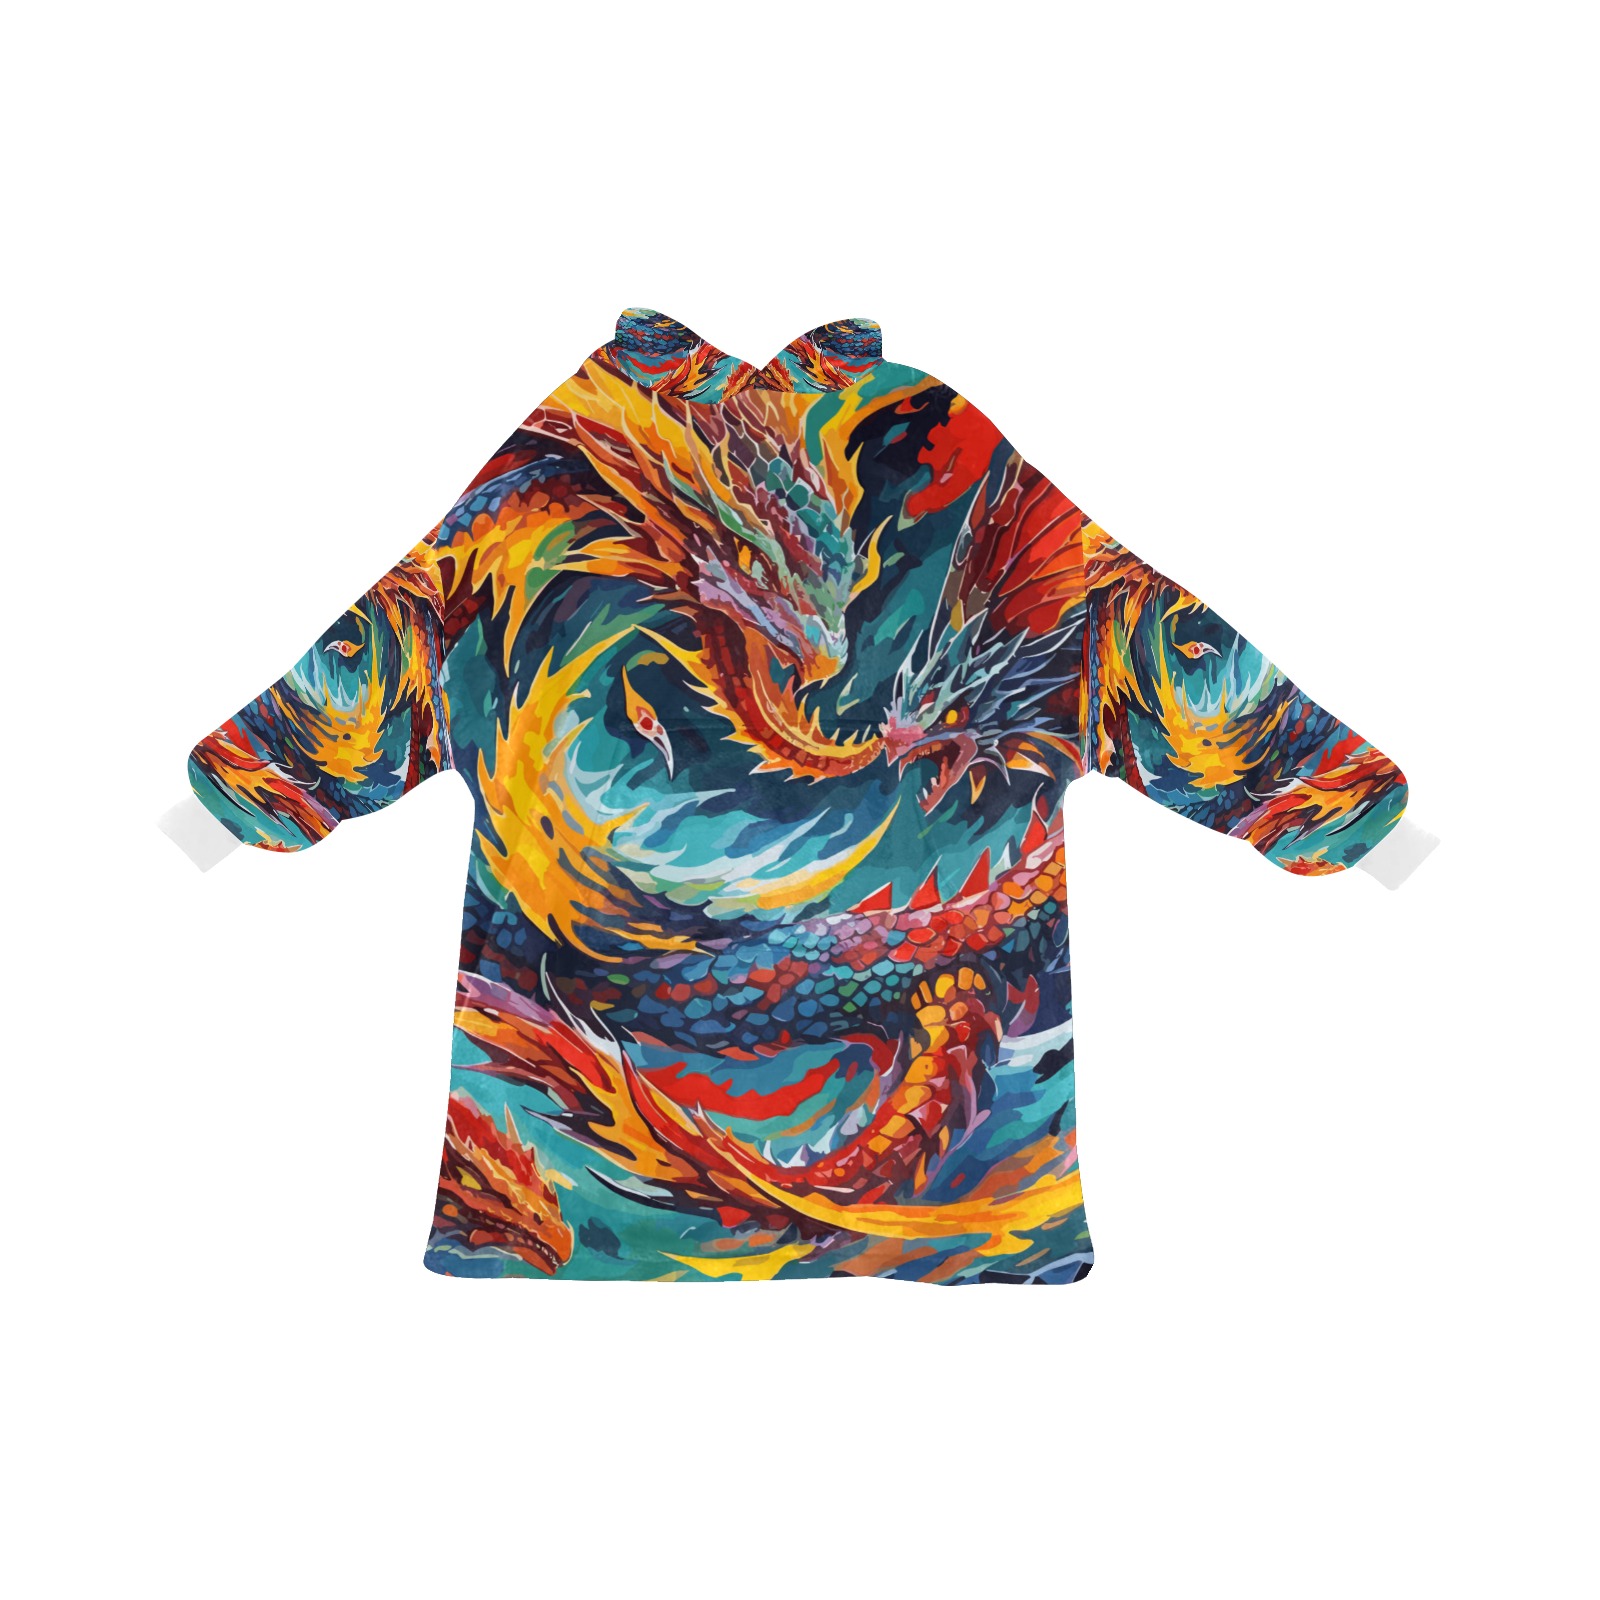 Fantasy fire dragons, flames and smoke art. Blanket Hoodie for Men